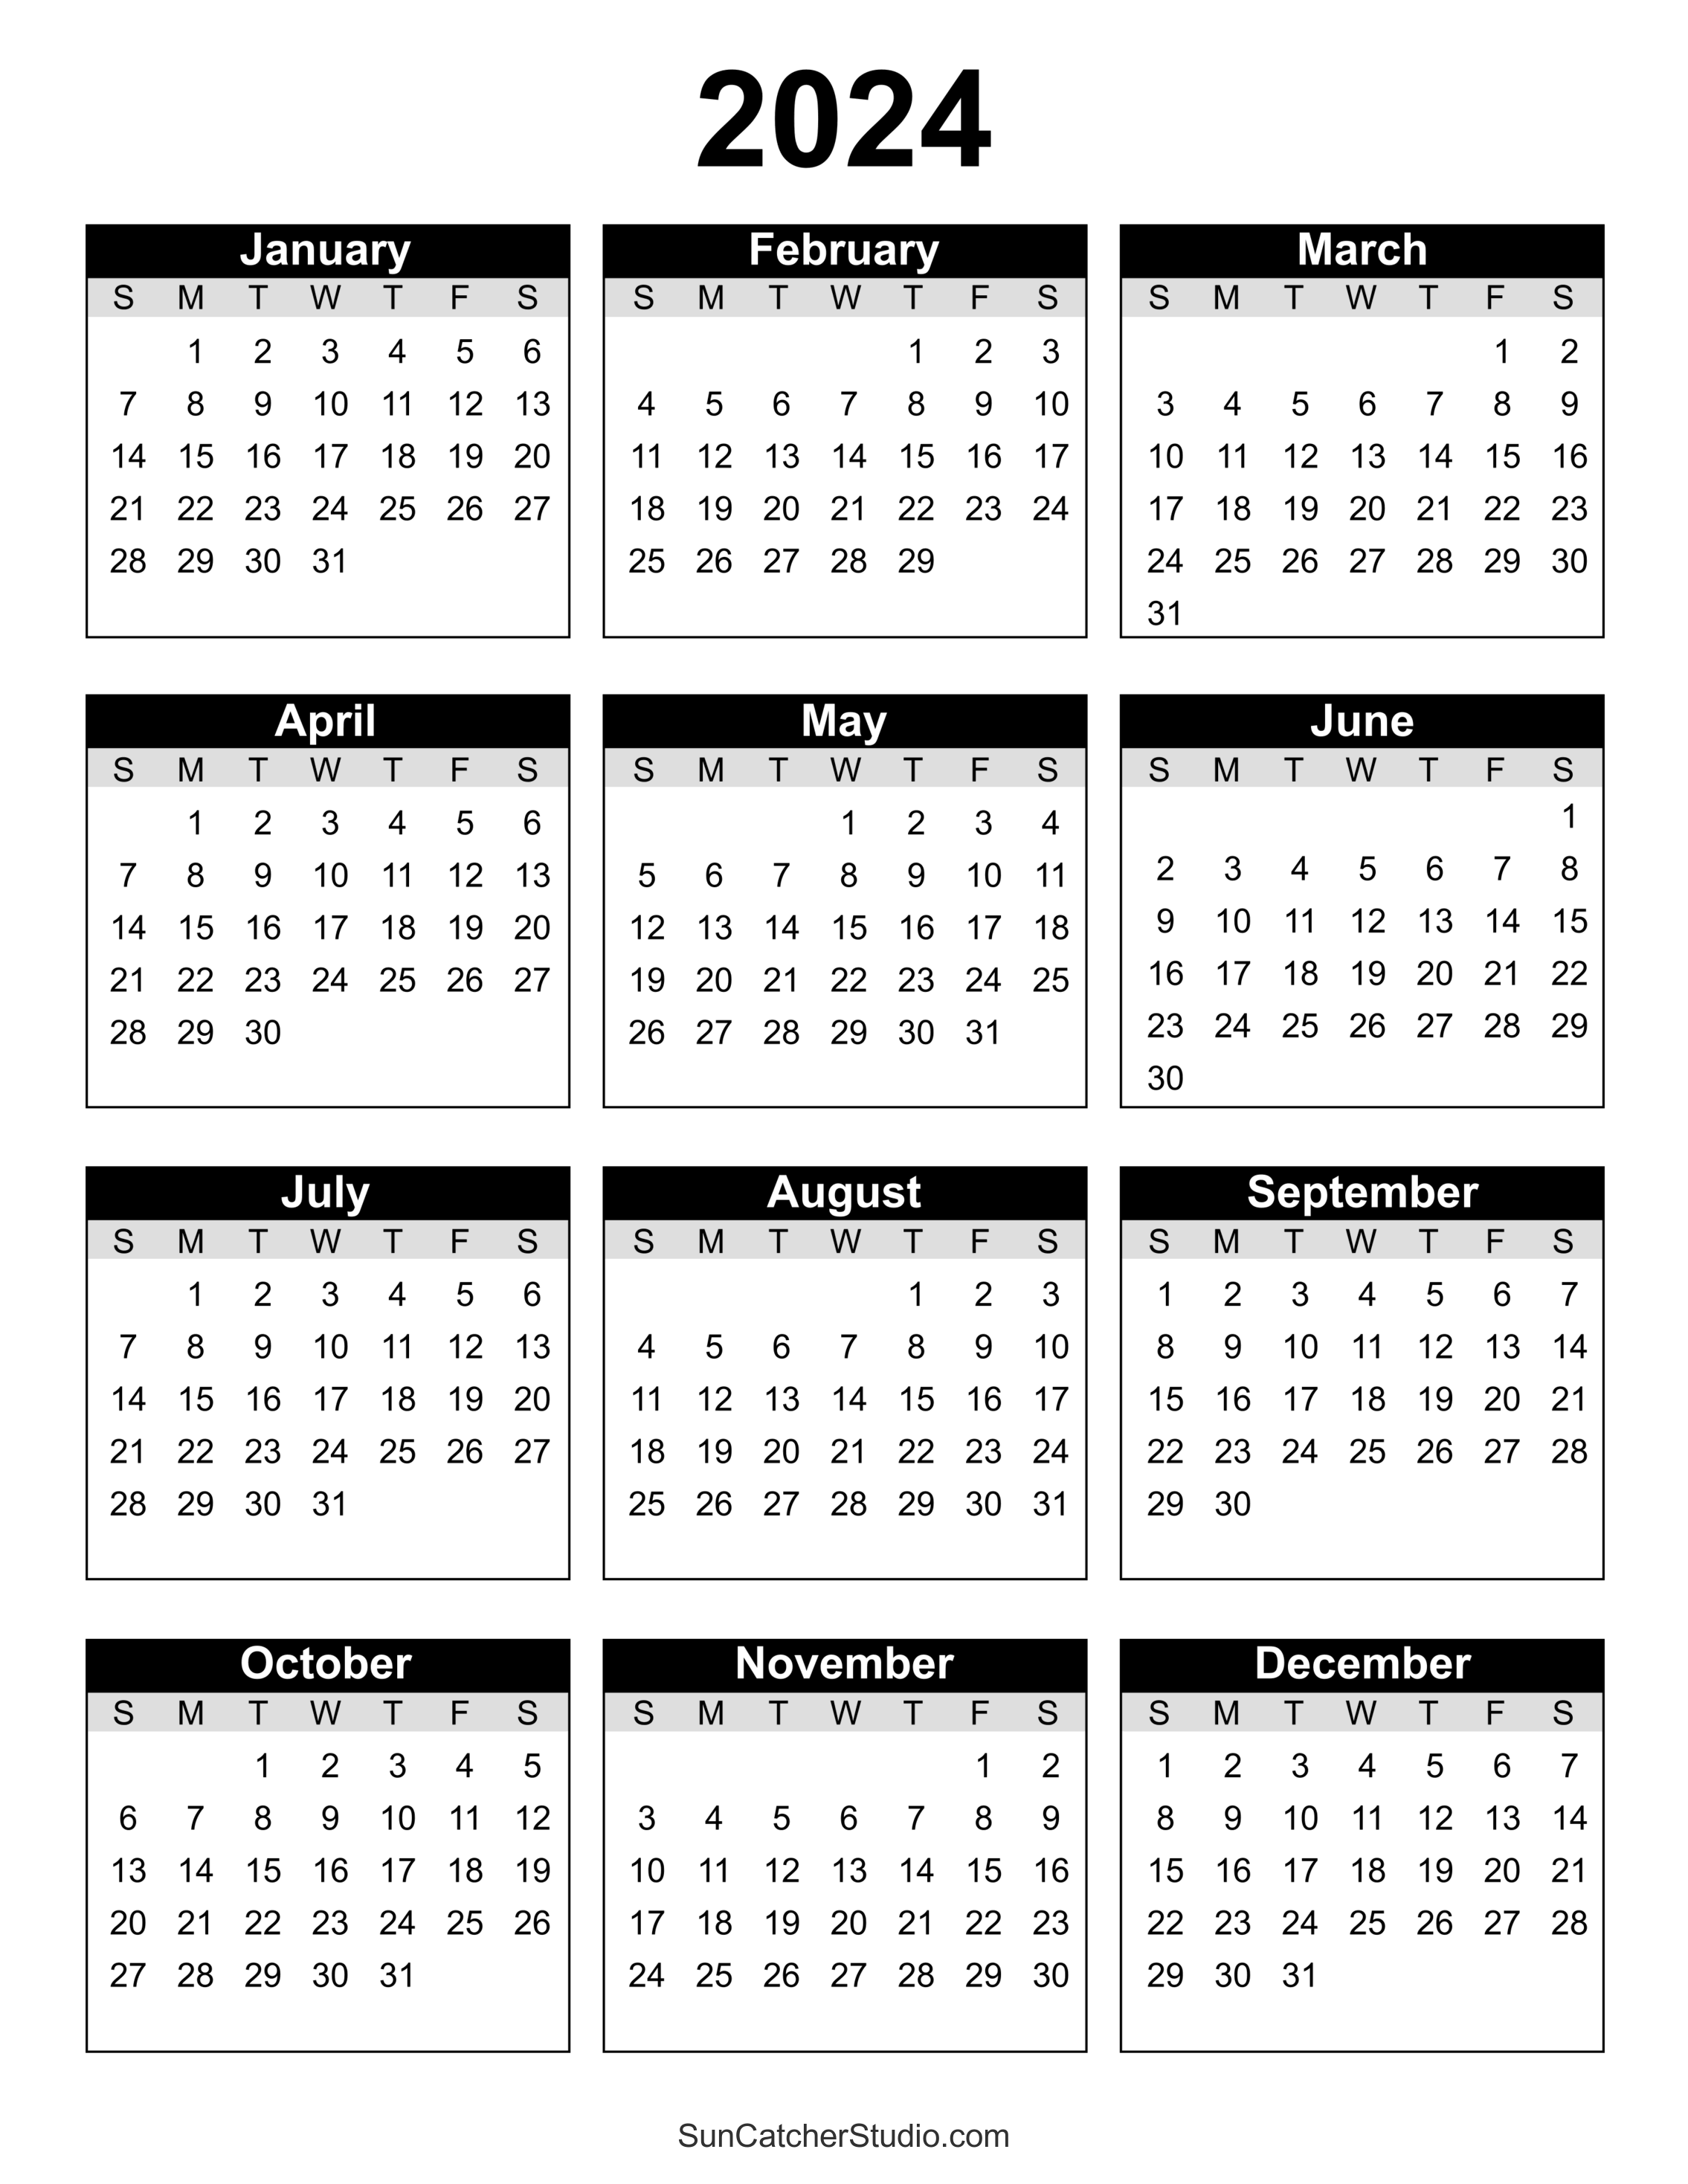 Free Printable 2024 Yearly Calendar – Diy Projects, Patterns inside Free Printable Blank Square Calendar 2024 Full Year